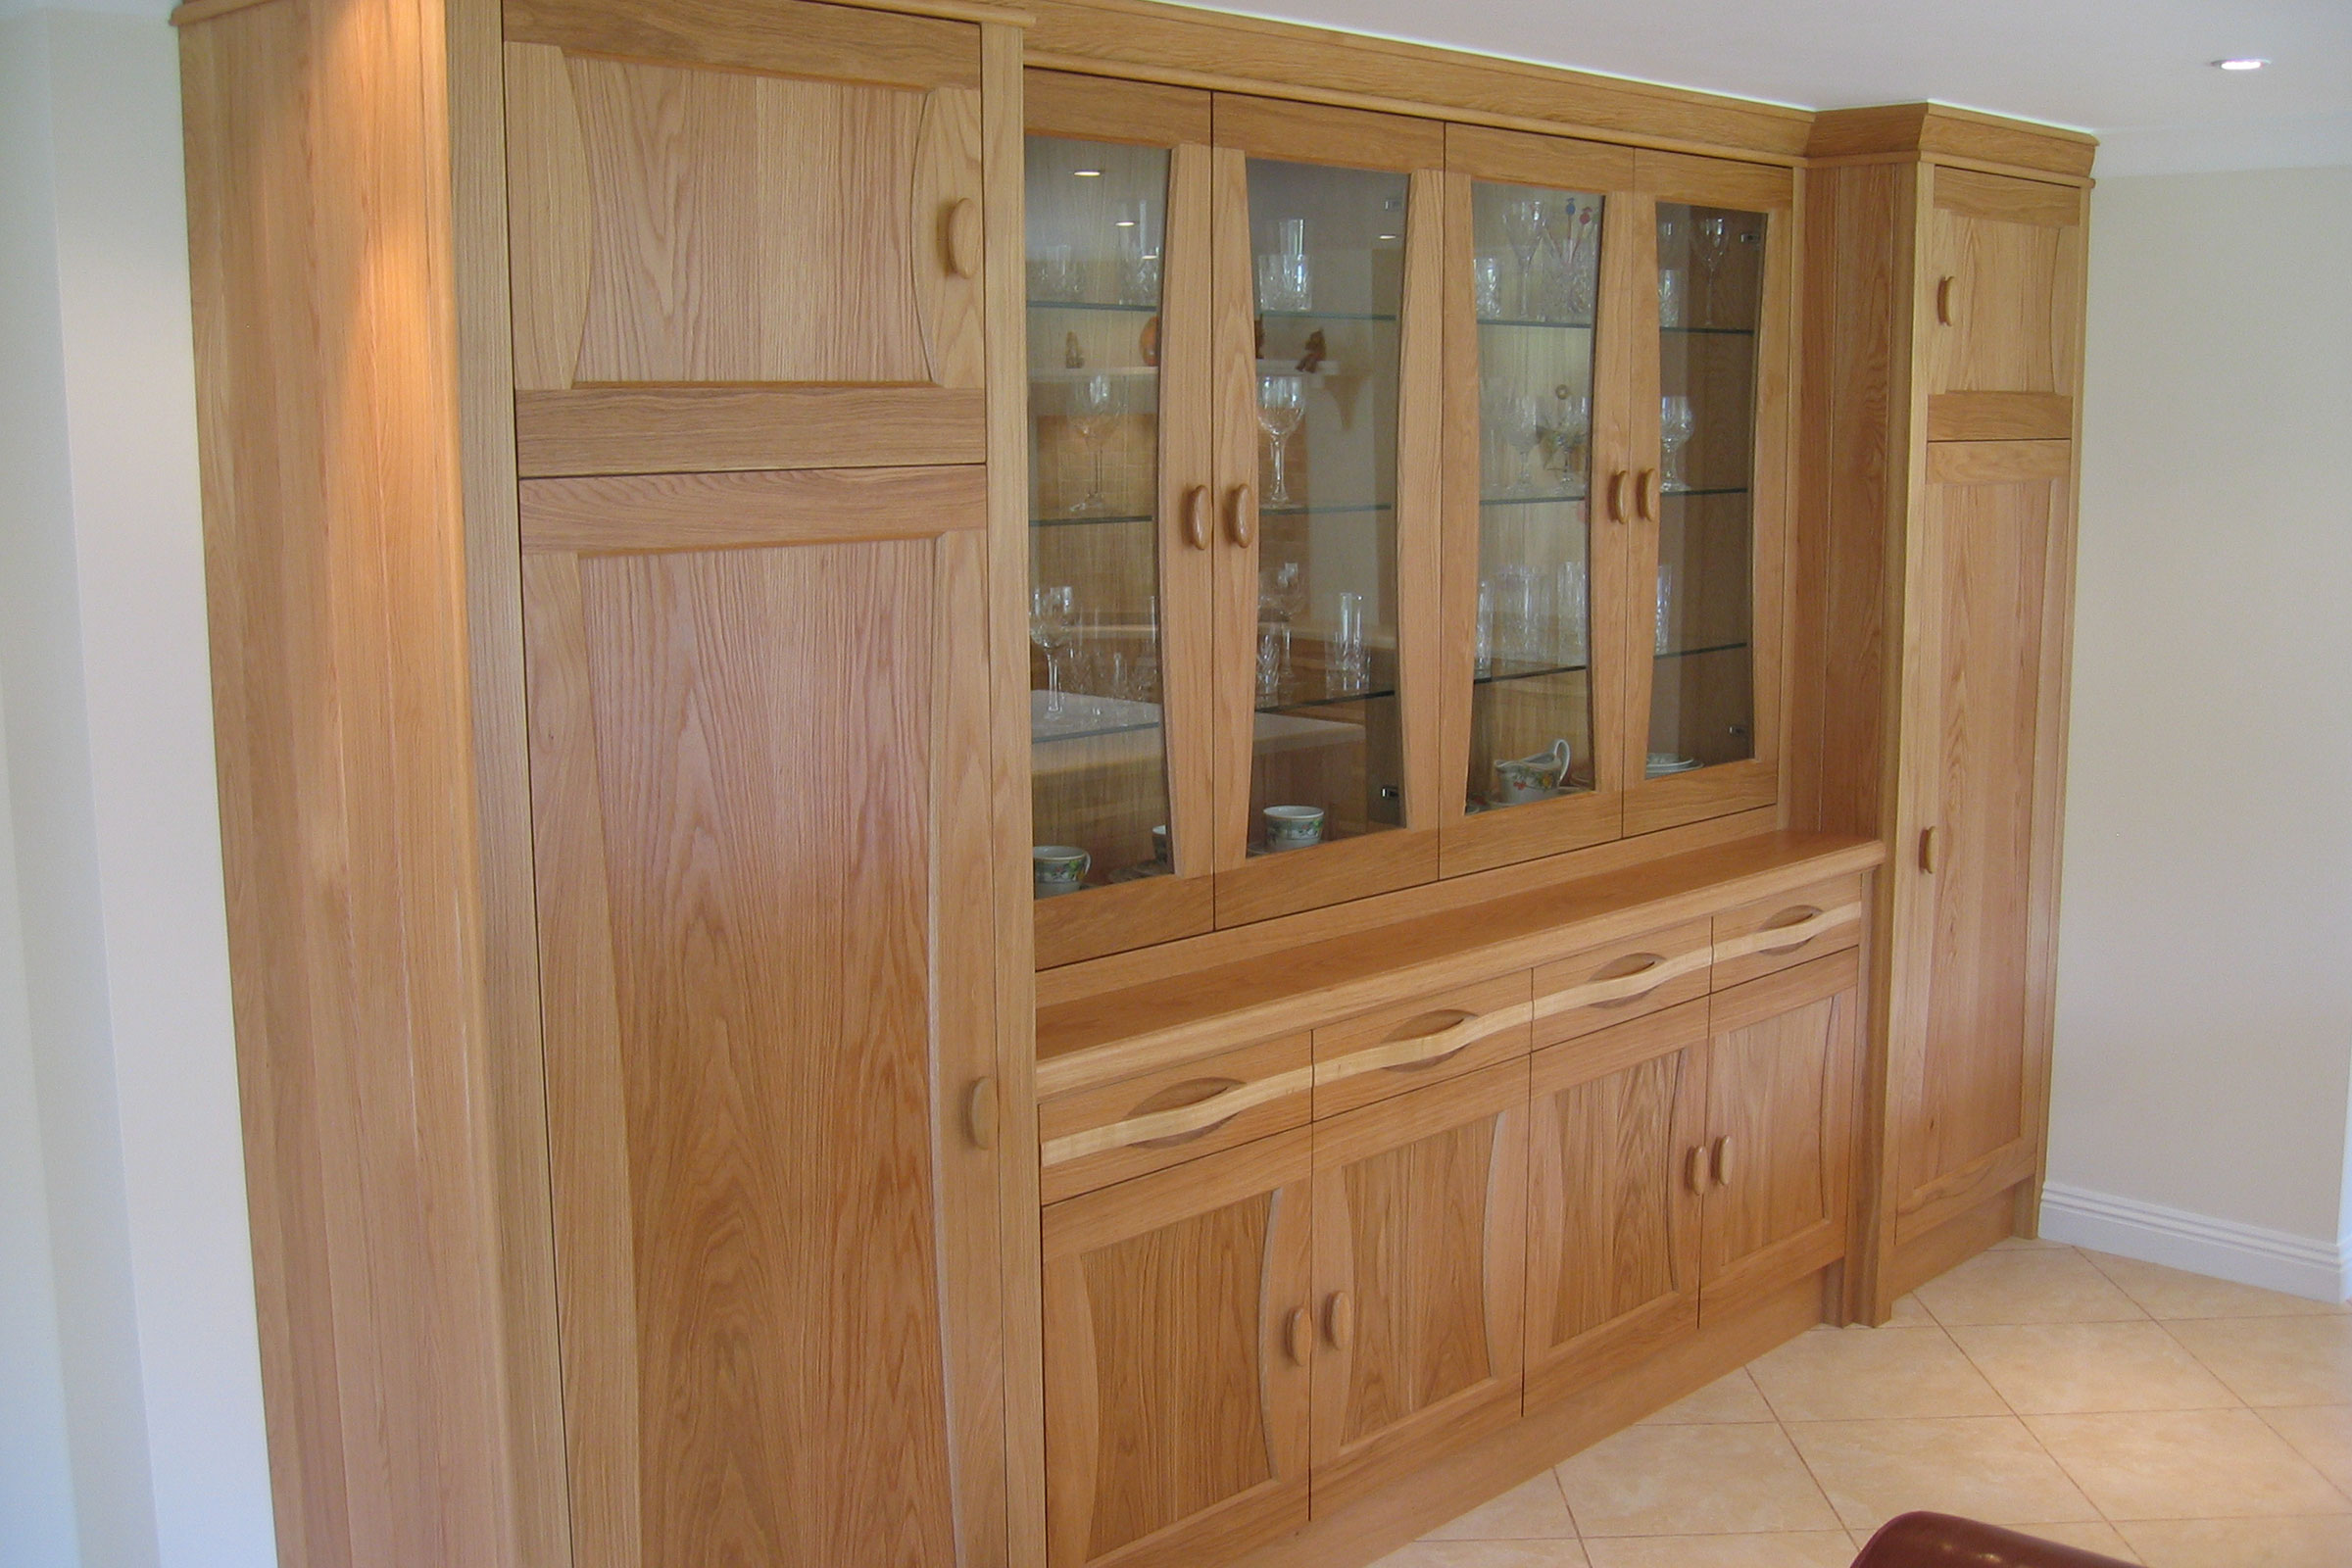 Bespoke cabinetry with grain matched wood across units